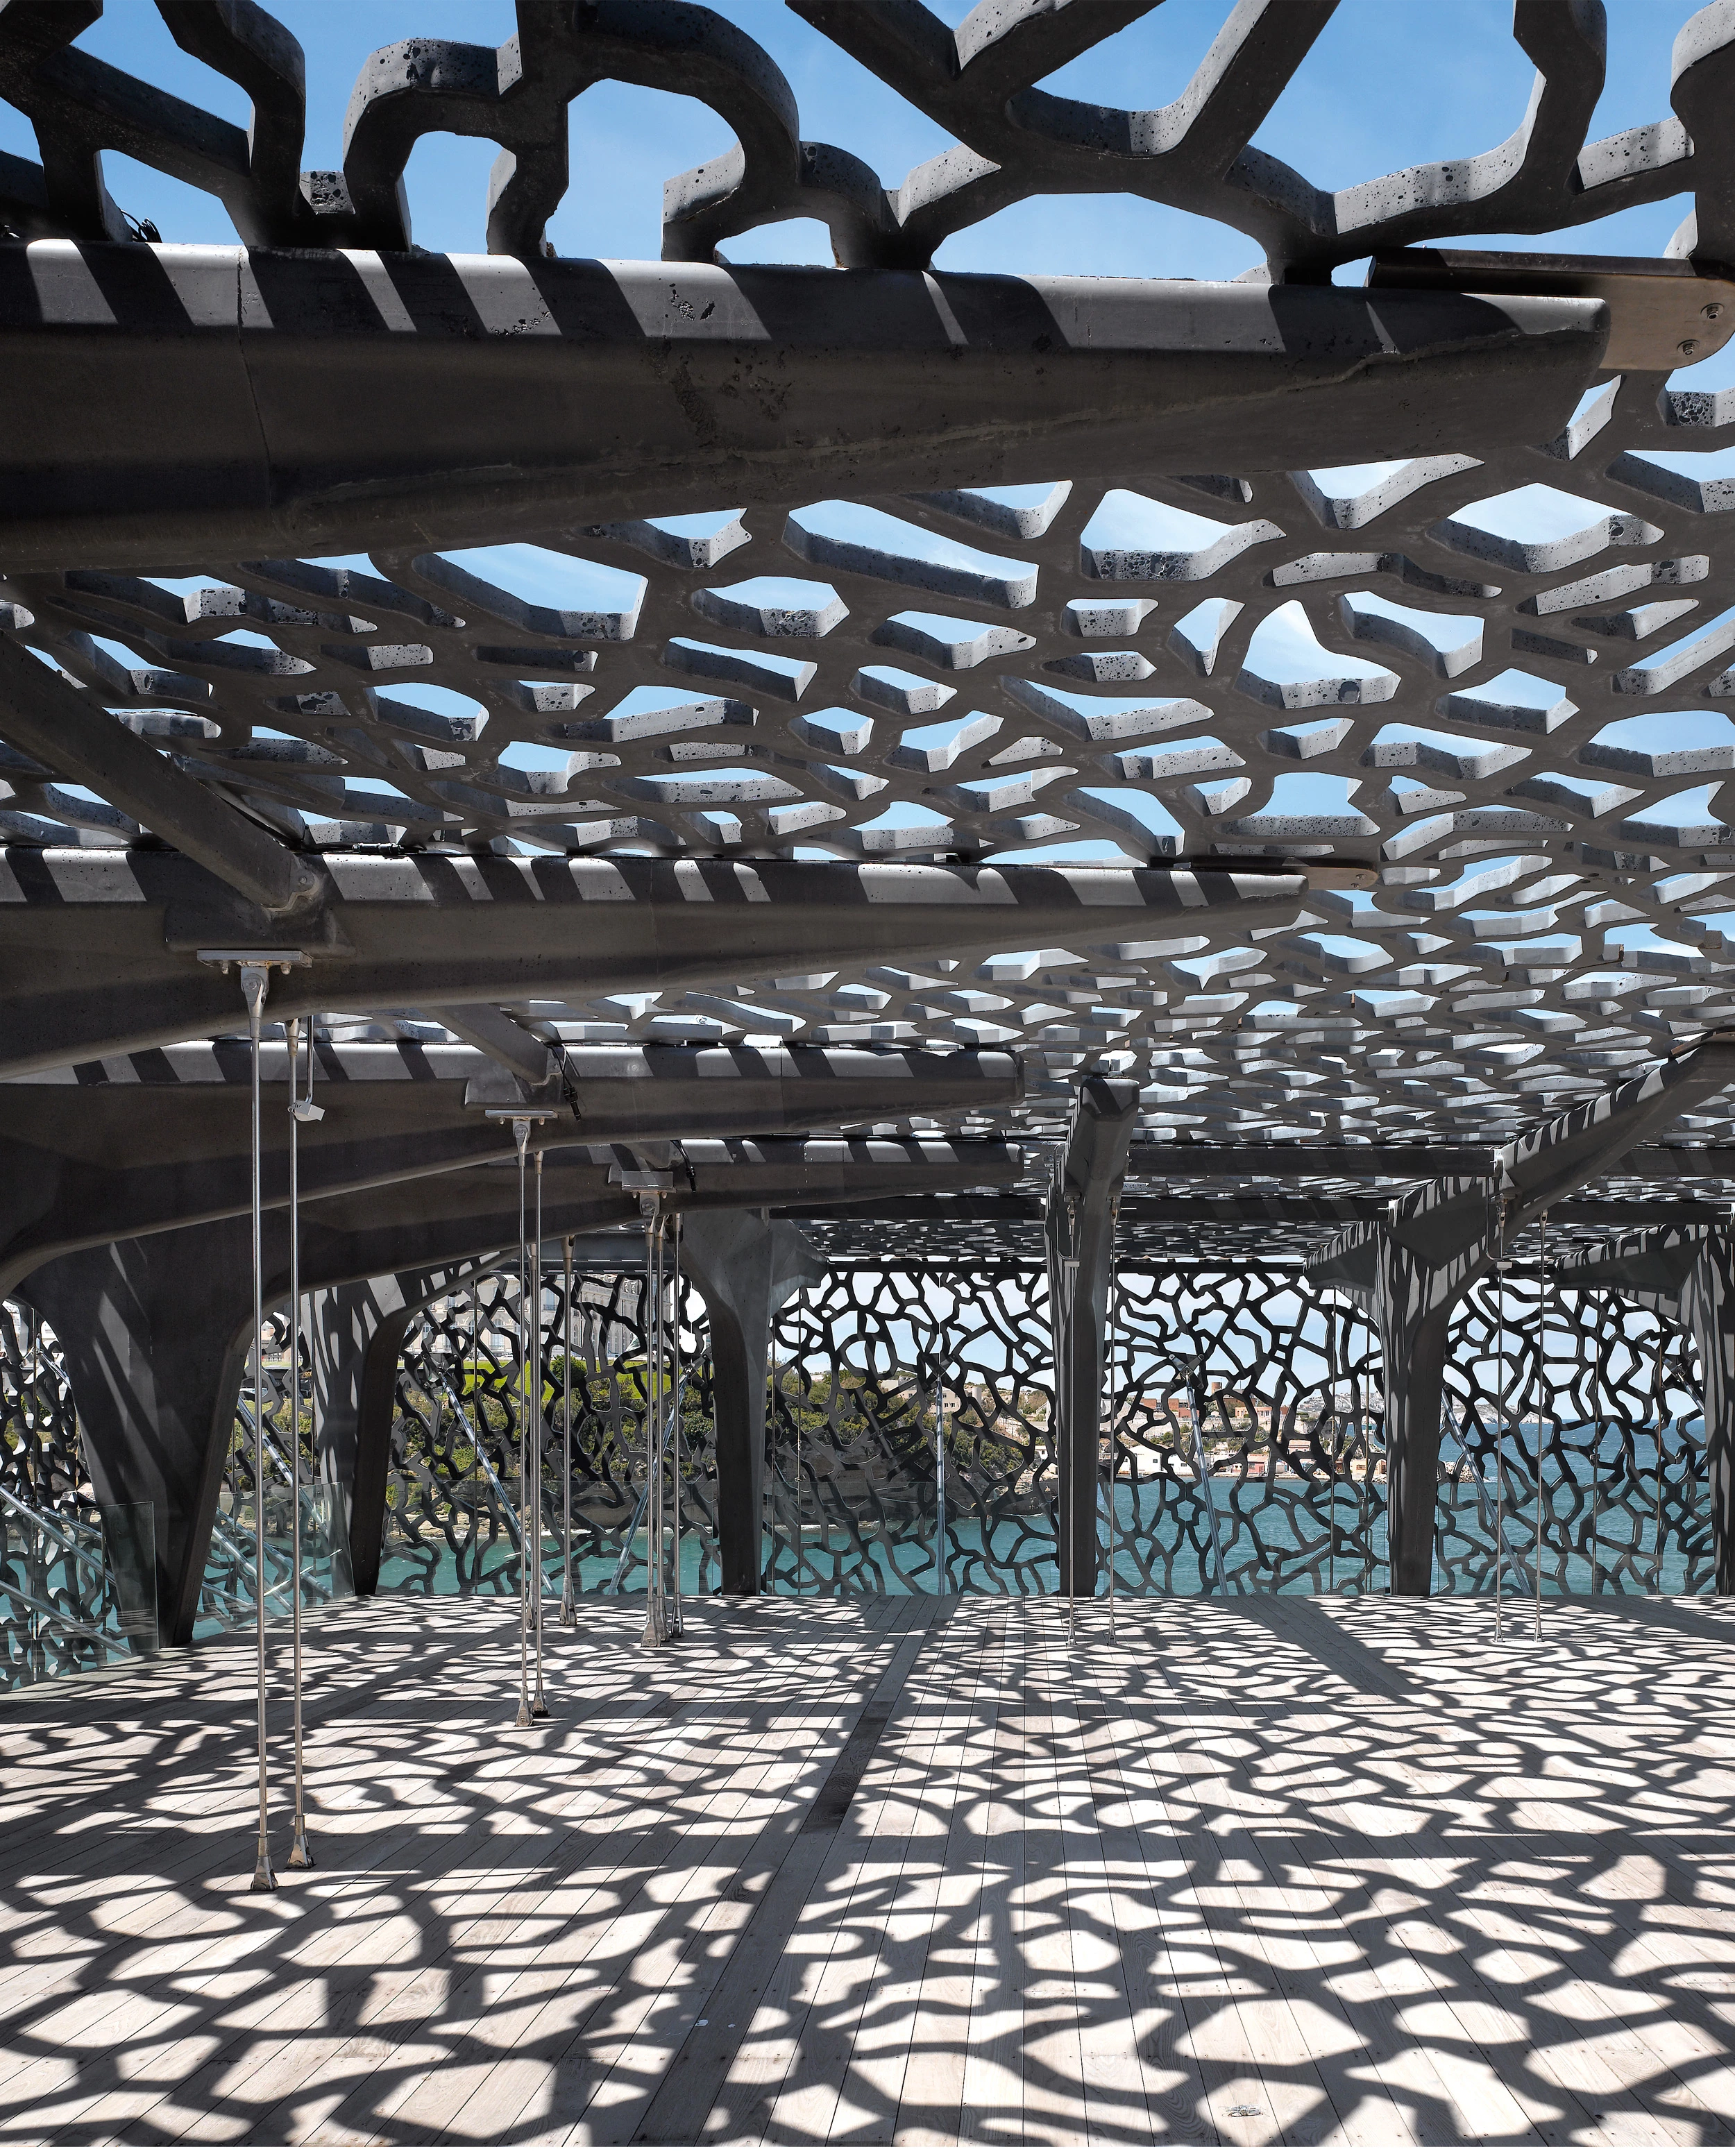 MuCEM / Museum of Civilizations of Europe and the Mediterranean in Marseille